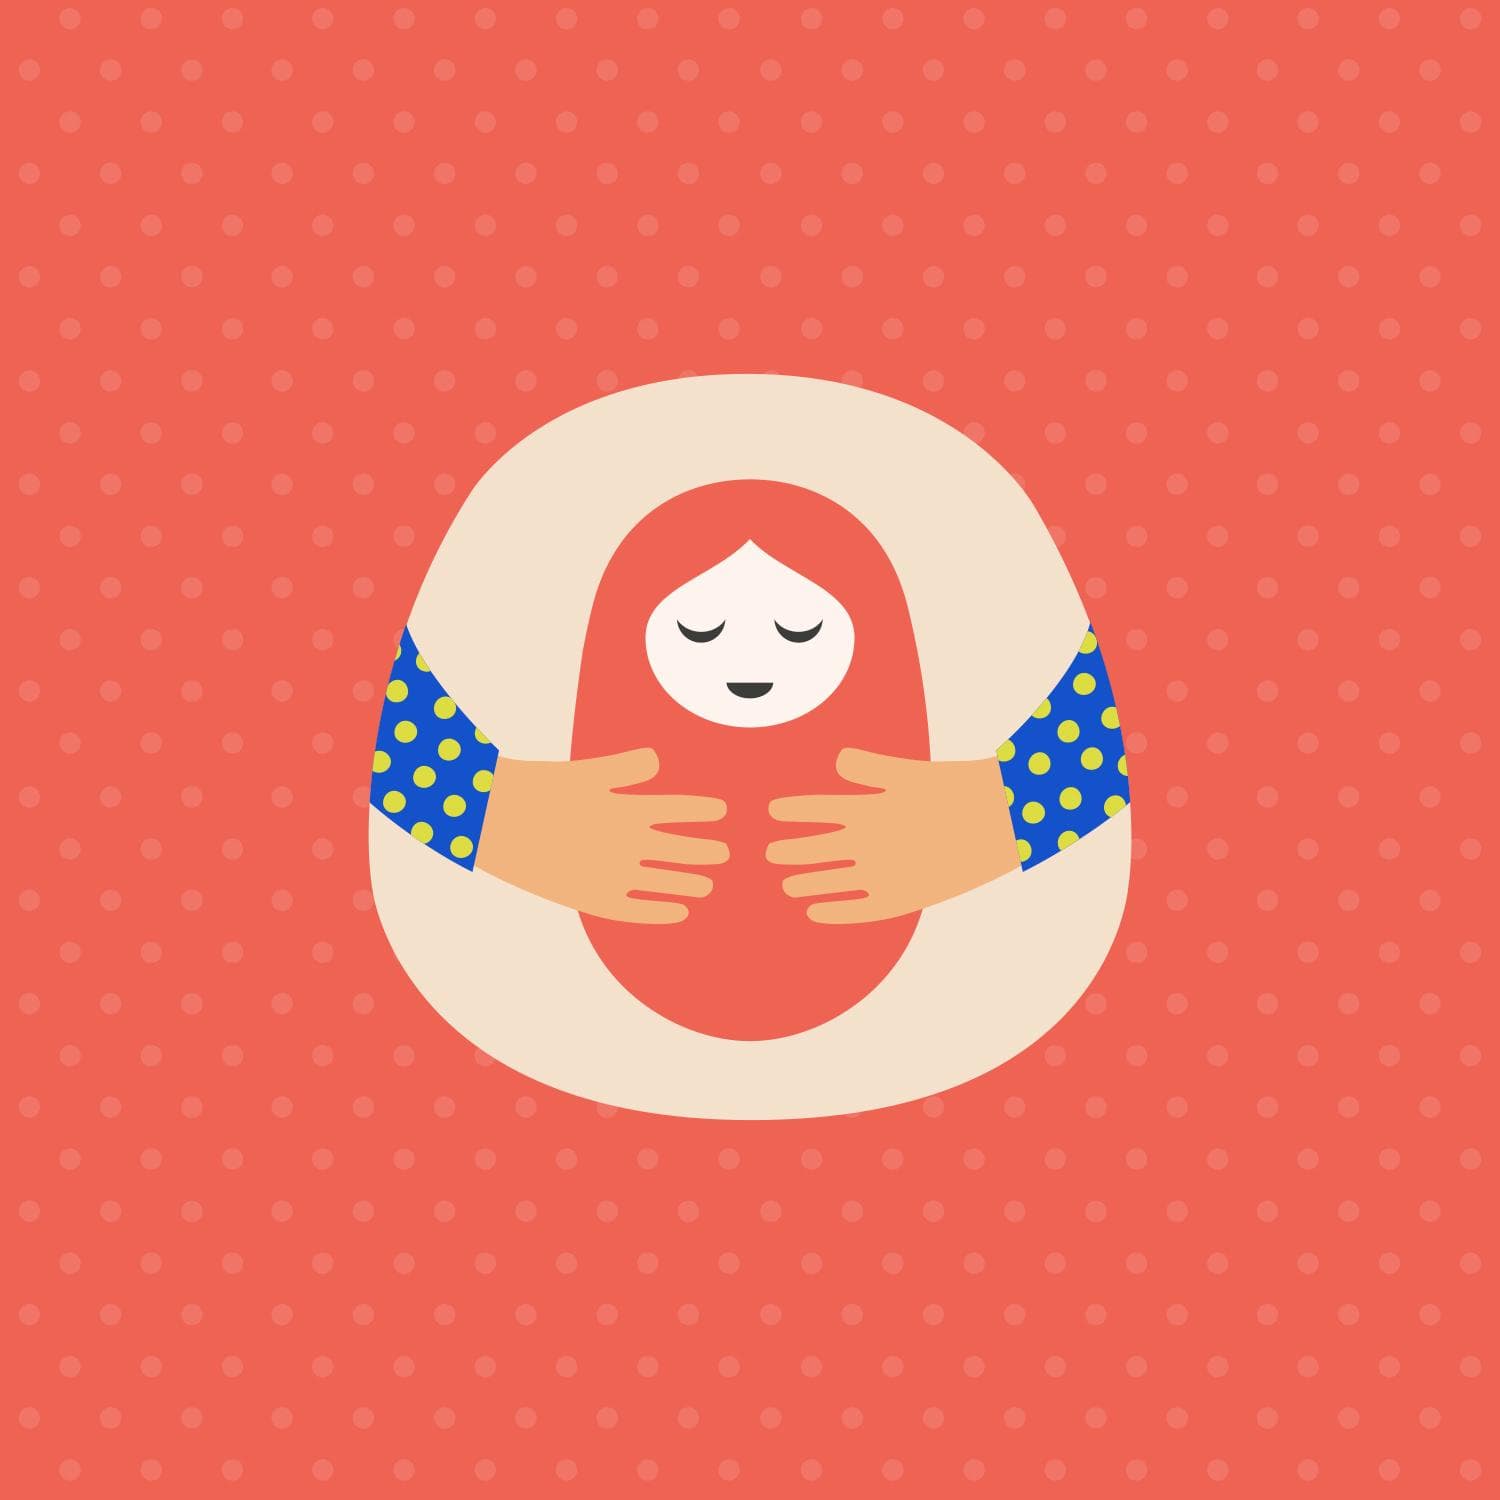 Logo illustration of hands protectively holding onto a baby